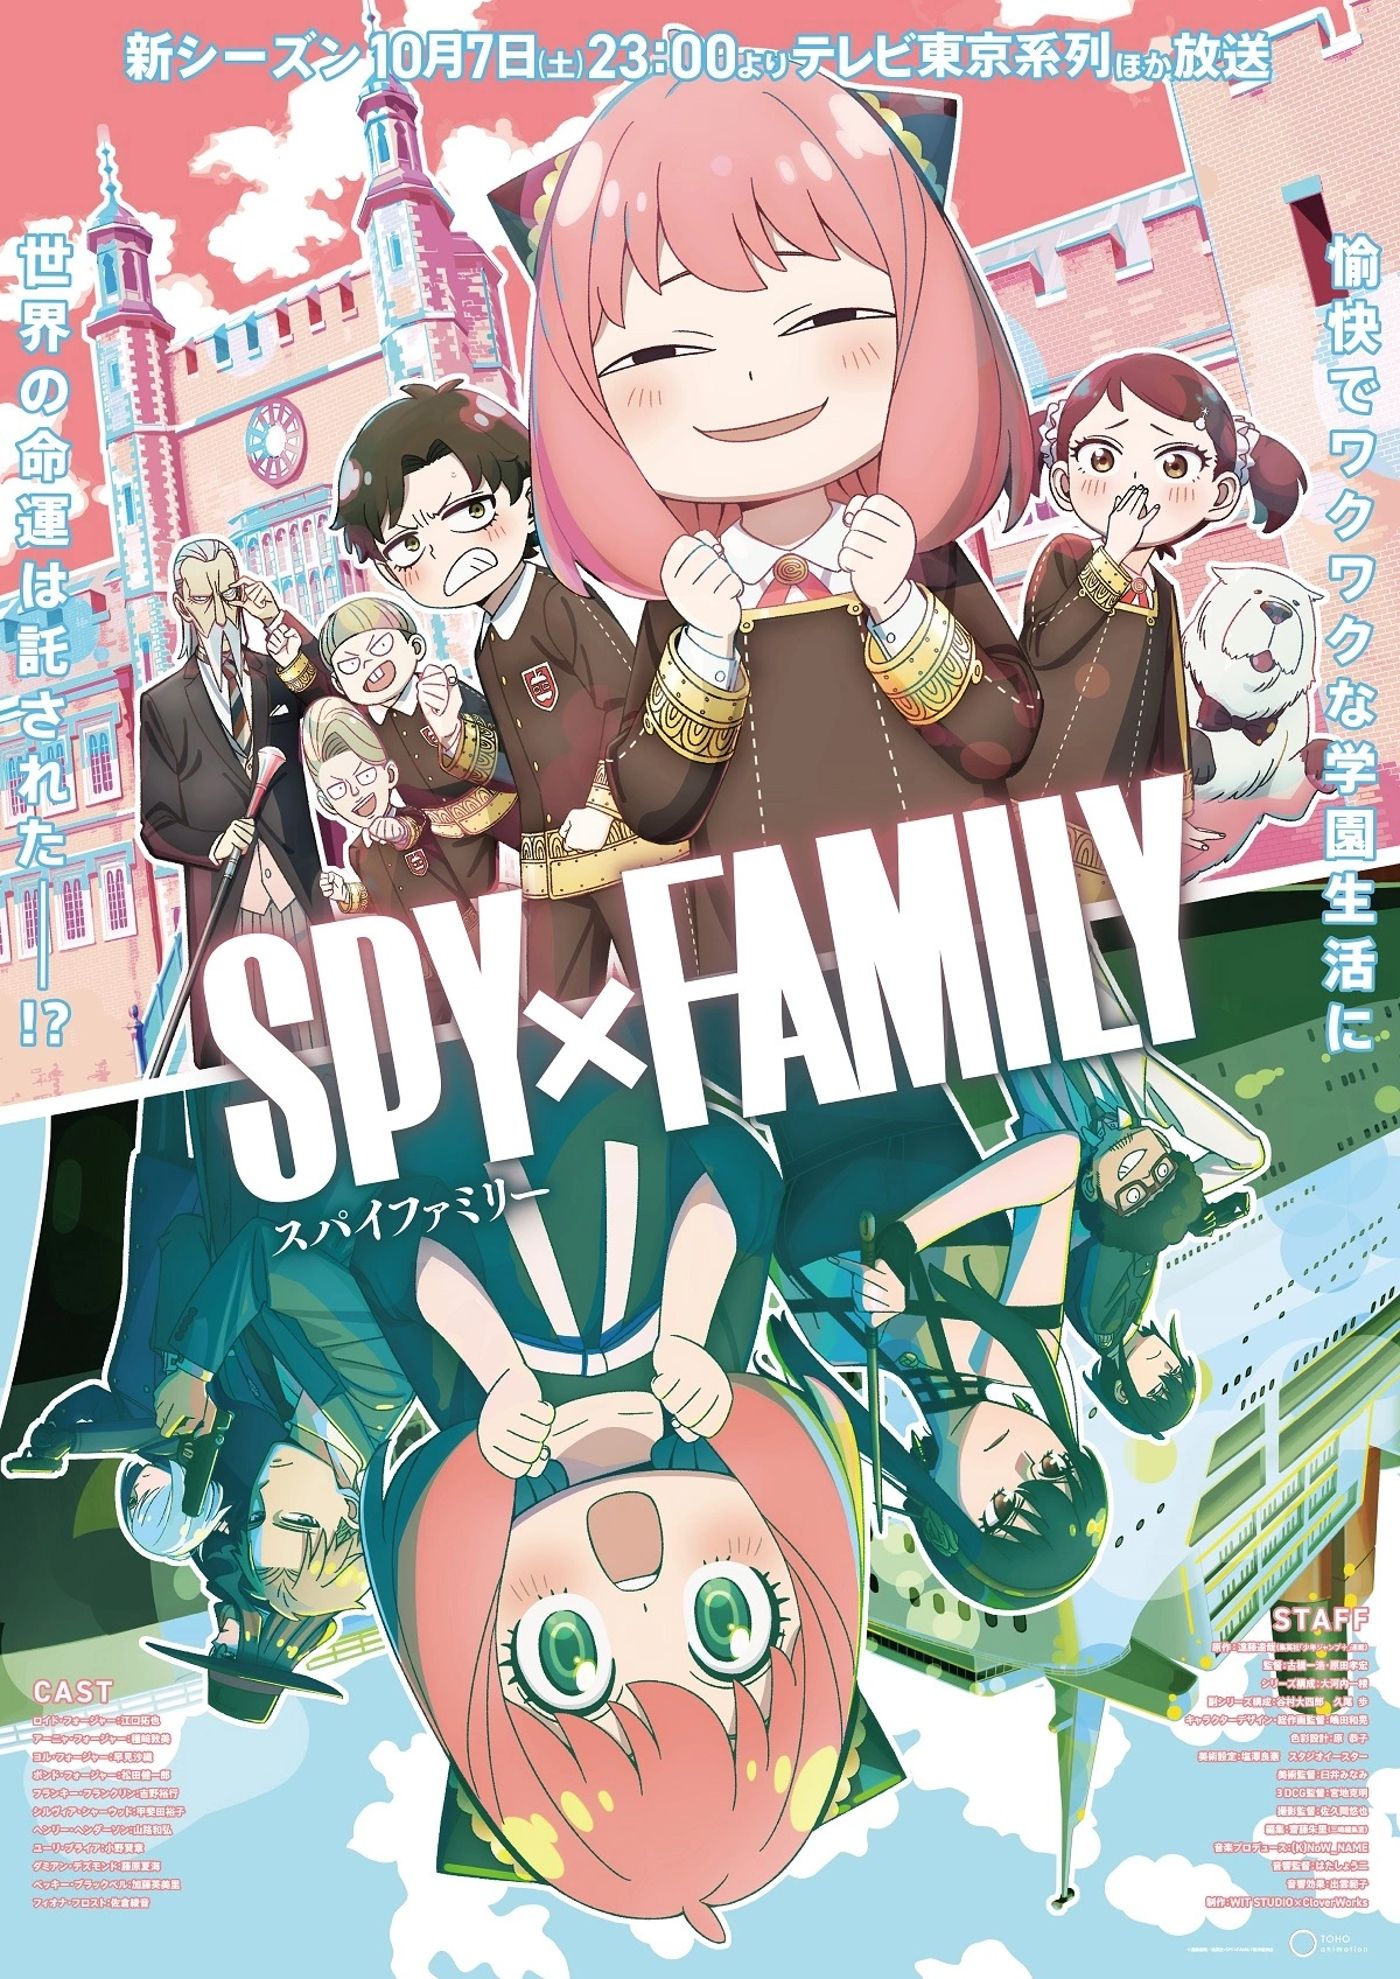 Spy x Family Season 2 Official Release Date Revealed